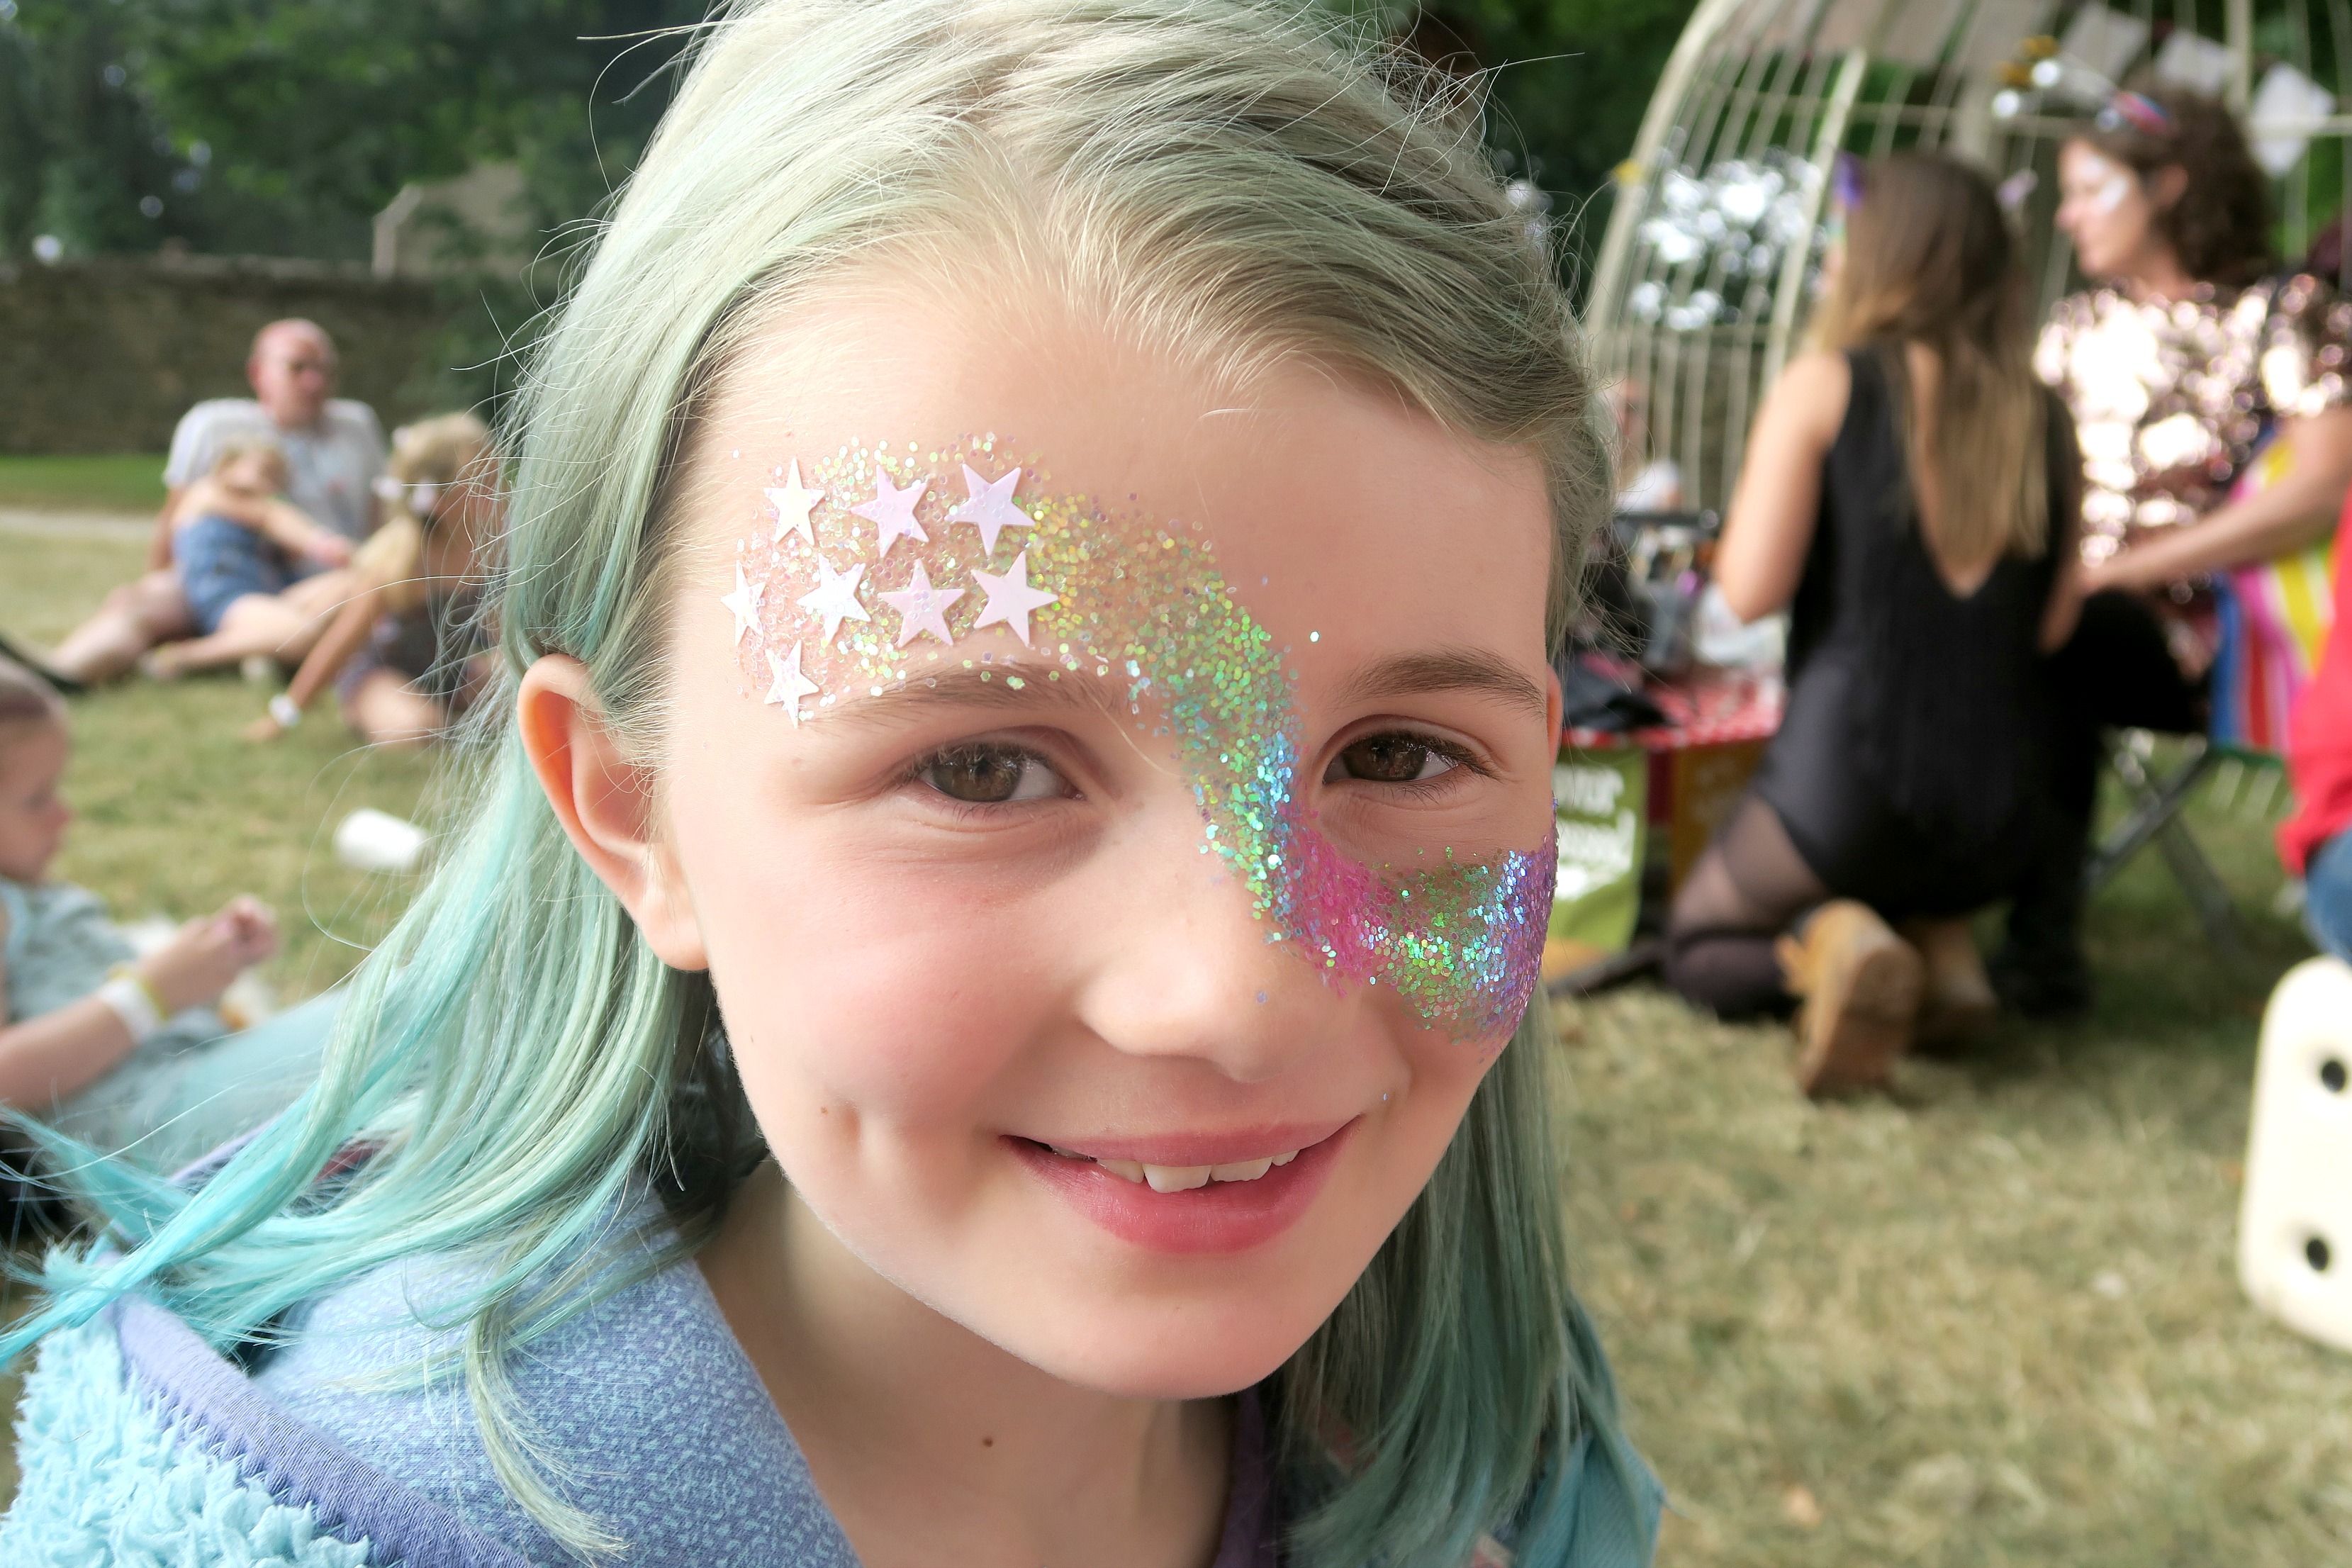 Festival style – it's all about glitter - Polly Jemima